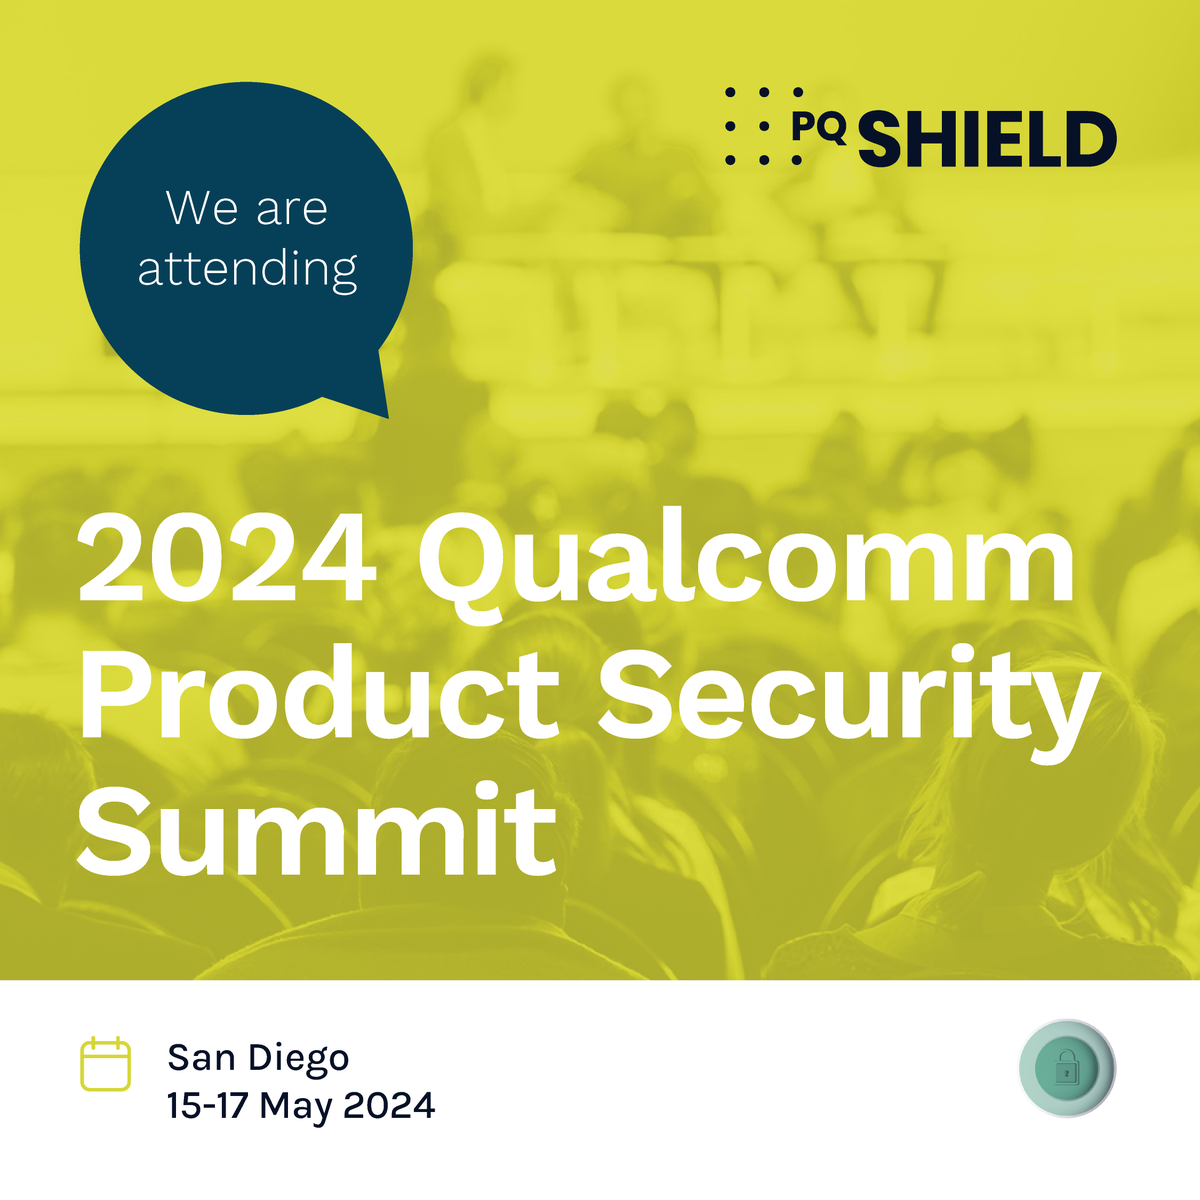 Our VP Product Dr Axel Poschmann will be attending the 2024 Qualcomm Product Security Summit in San Diego on May 15-17. If you would like to meet with Axel, please do reach out. #productsecurity #cryptography